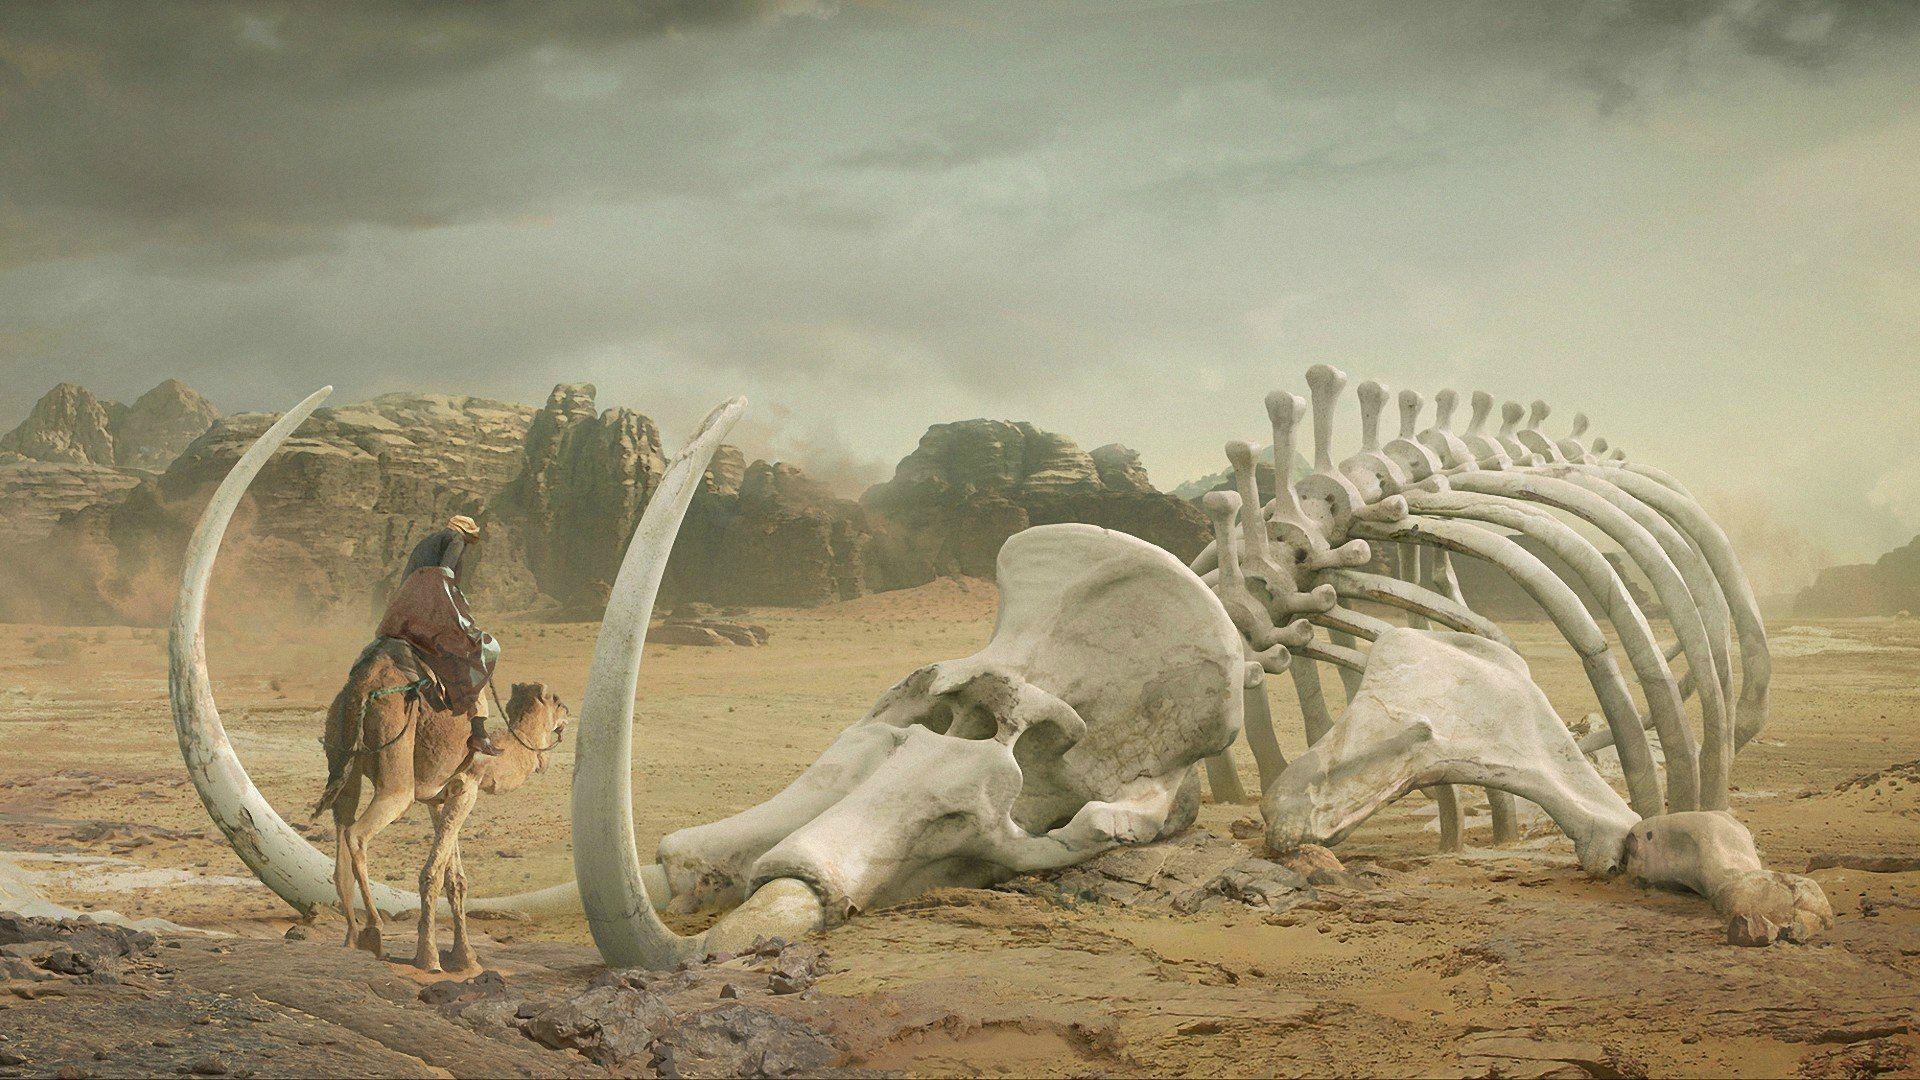 The skeleton of a mammoth in the desert wallpaper and image